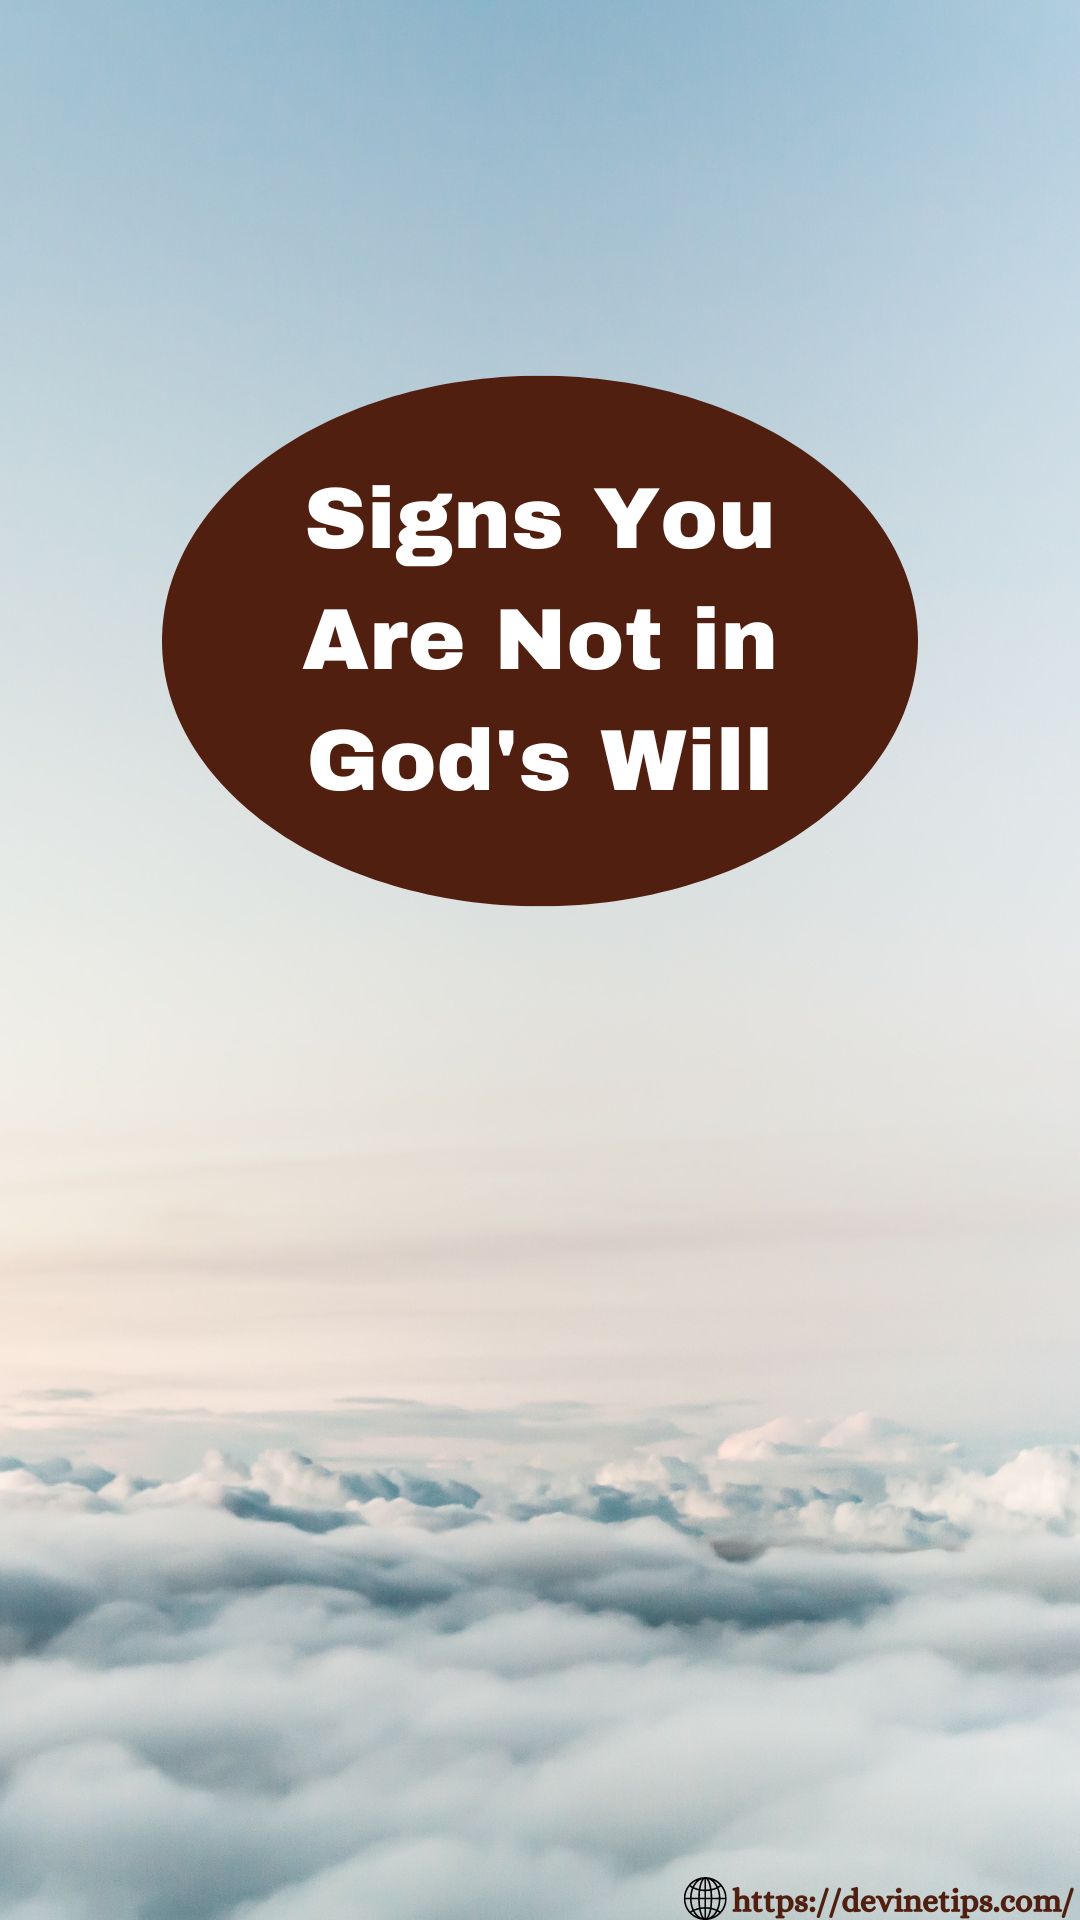 Signs You Are Not in God’s Will